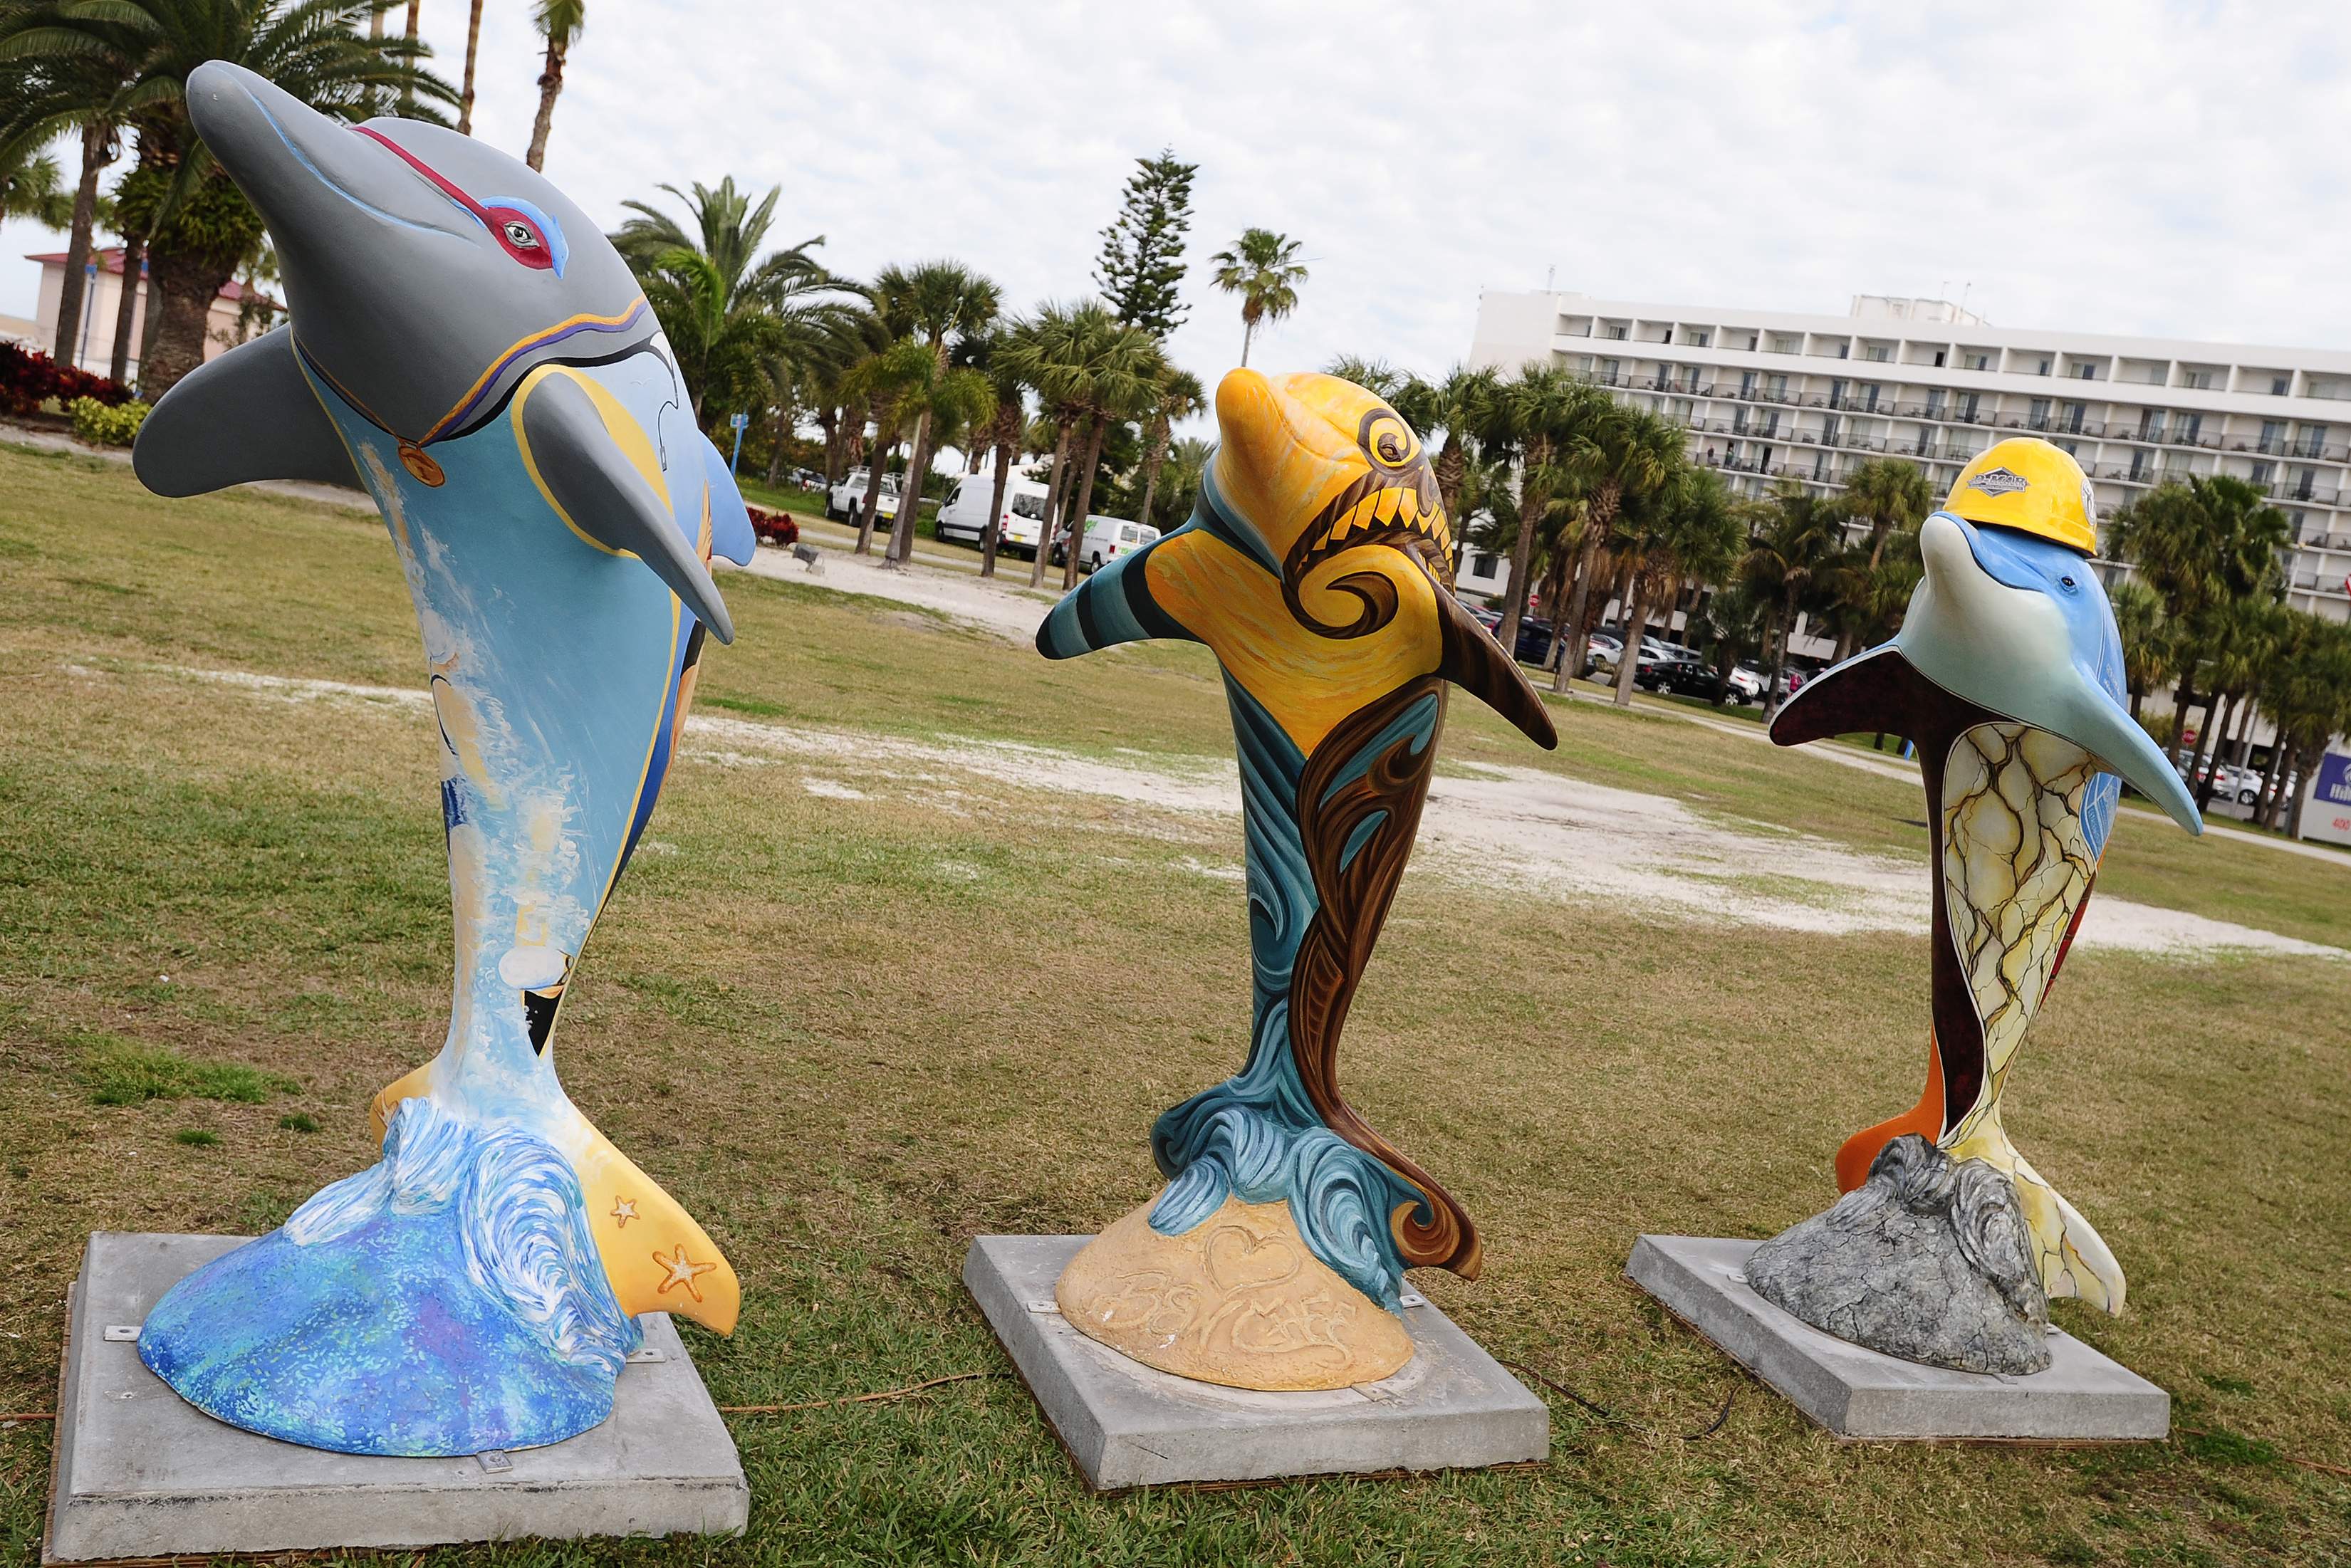 Dolphin sculpture to welcome visitors to Clearwater trail | tbo.com